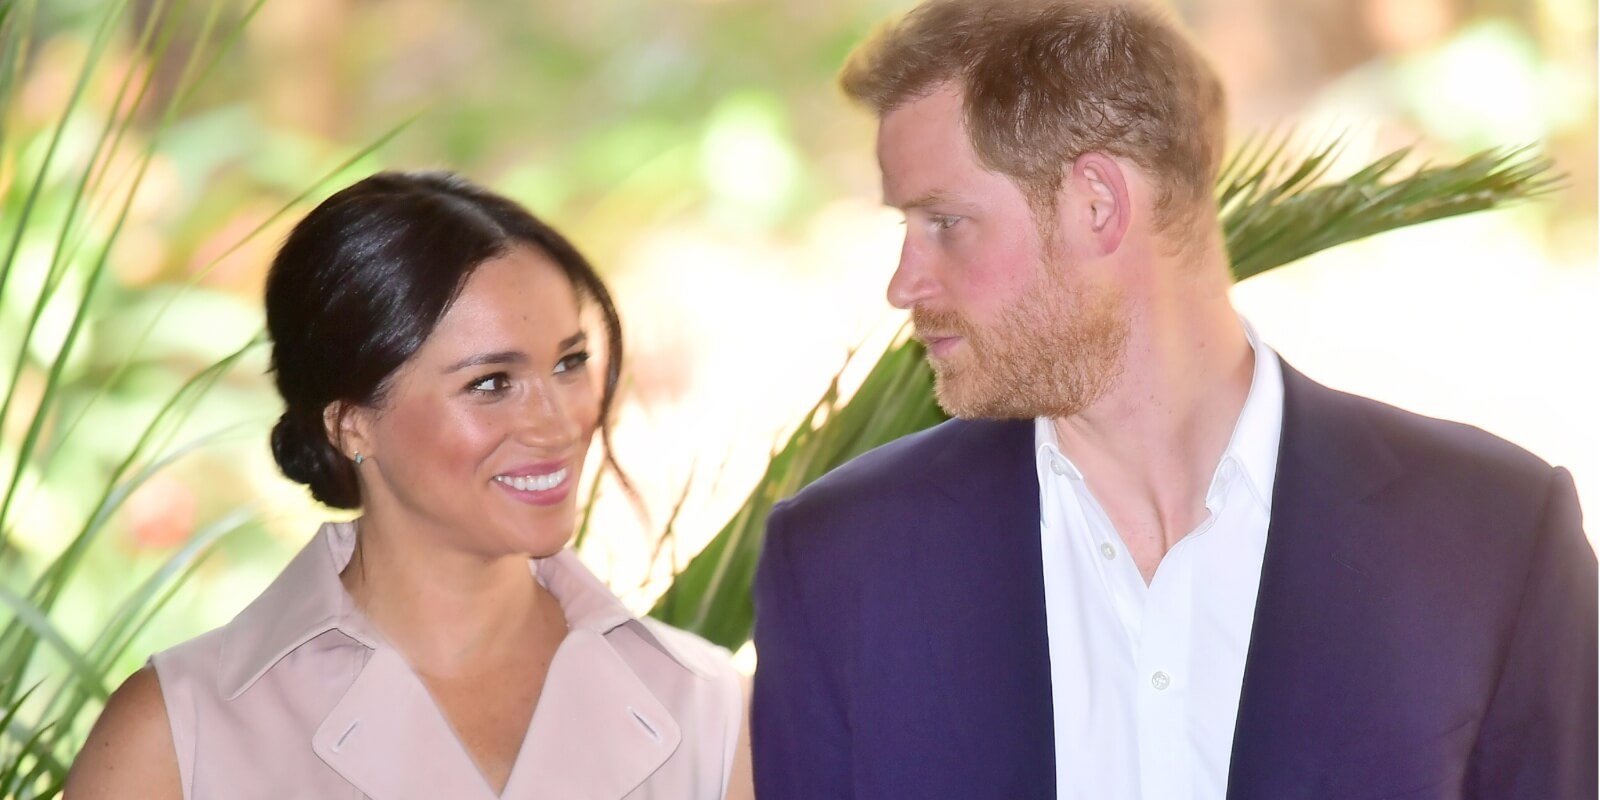 Meghan Markle and Prince Harry photographed in 2019 in Johannesburg, South Africa.